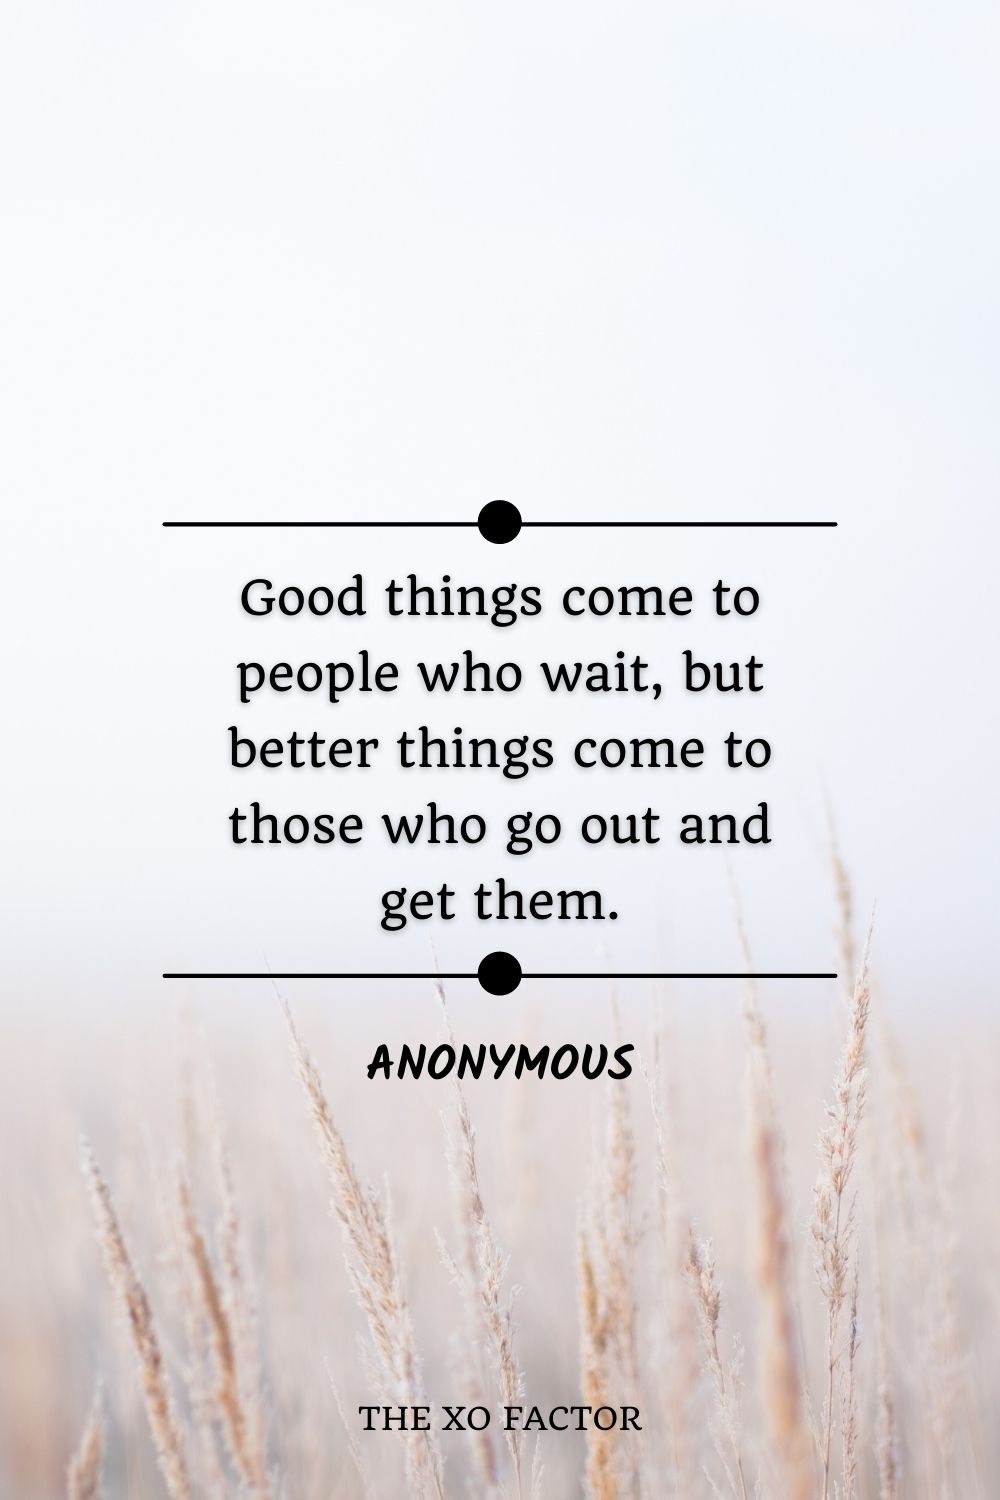 Good things come to people who wait, but better things come to those who go out and get them. Anonymous